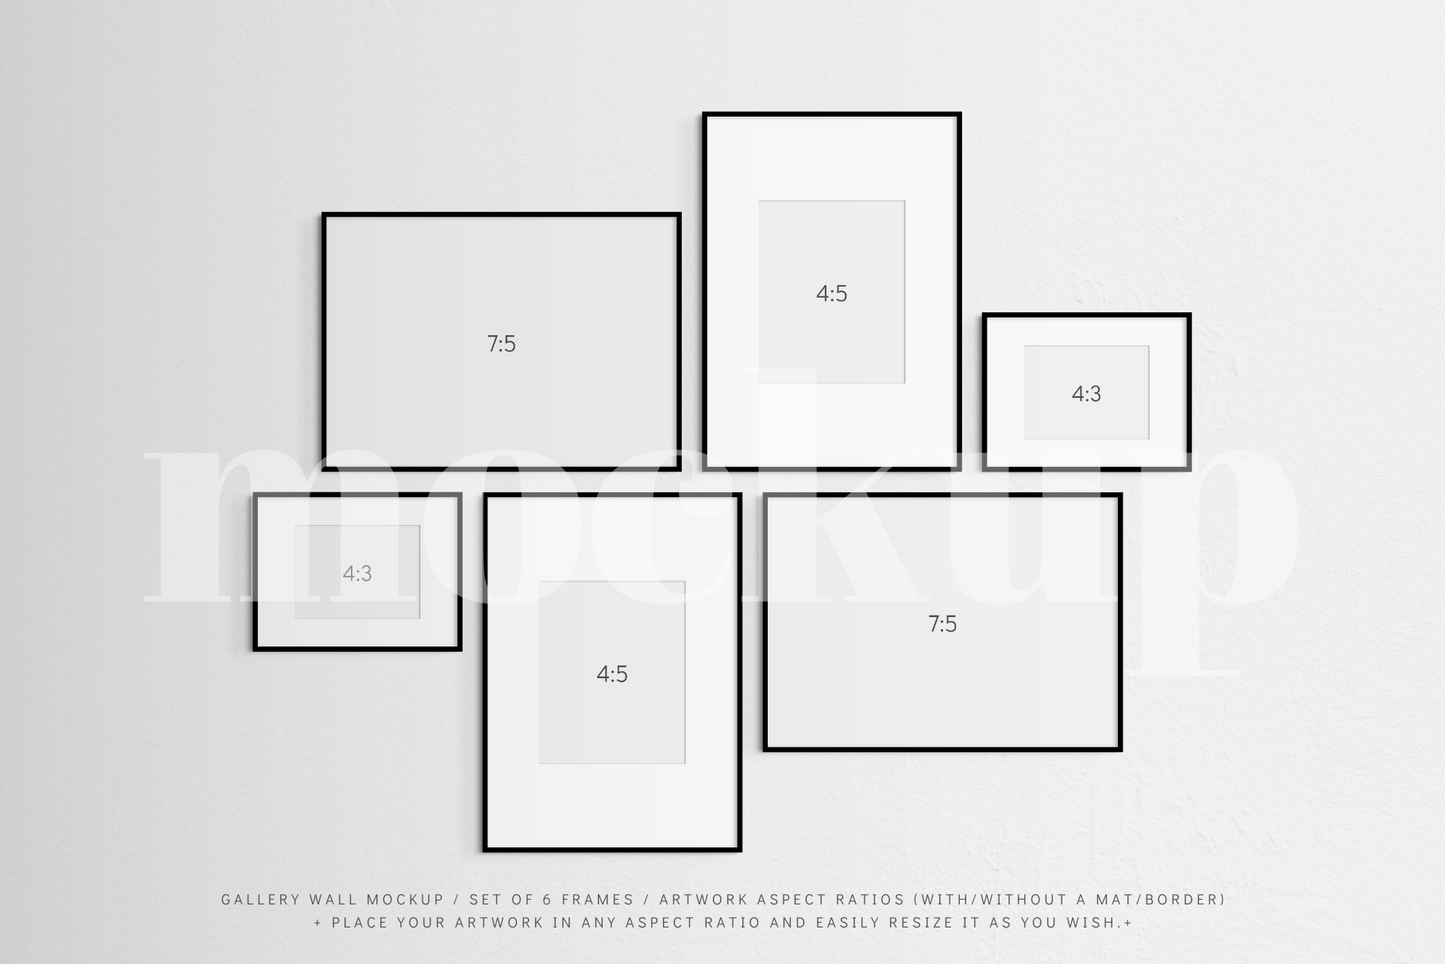 A gallery wall frame mockup that features a set of 6 thin black frames with or without a white mat (passe-partout) border.